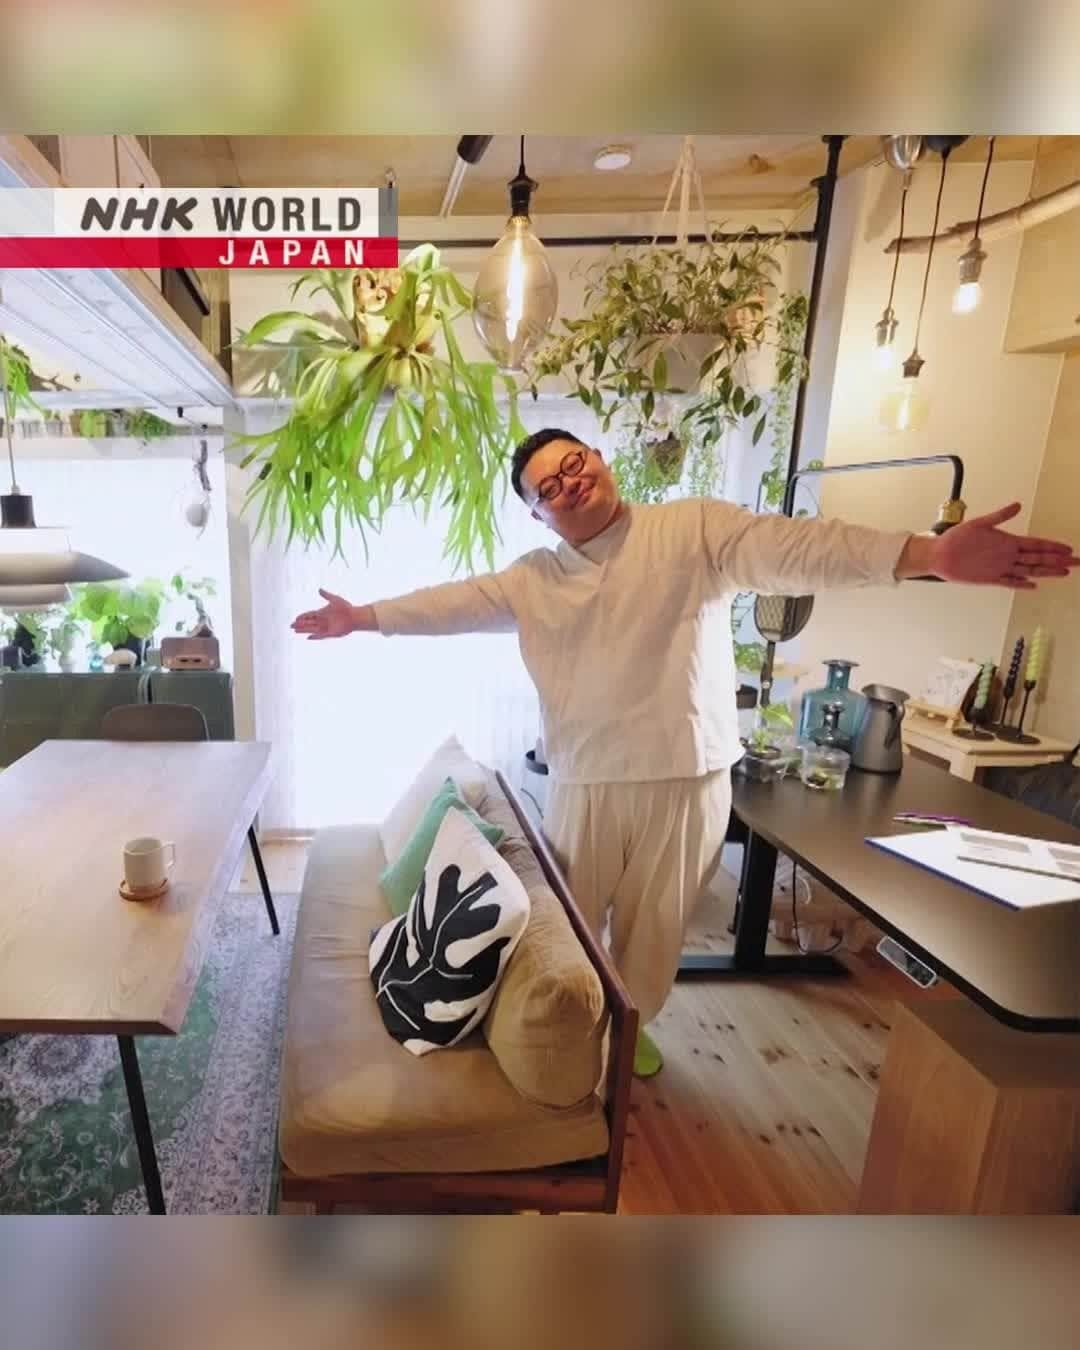 NHK「WORLD-JAPAN」のインスタグラム：「Look at these handy storage ideas from Tokyo organization consultant and interior stylist, Ando Hidemichi. ✨ He lives in a 47 sqm apartment with his partner of 11 years, Butajiru.  Hidemichi believes clearing a space is not only material, but is also a way to change your inner self. 😀  He speaks from personal experience, as it was through putting his own possessions in order that he was able to move forward for the better in his life.💖 . 👉Take a tour of Hidemichi’s Tokyo apartment and discover more of his story｜Watch｜ROOOOMS! Japan: Storage & Organization Consultant Ando Hidemichi's Mind-clearing Hideaway｜Free On Demand｜NHK WORLD-JAPAN website.👀 . 👉Tap in Stories/Highlights to get there.👆 . 👉Follow the link in our bio for more on the latest from Japan. . 👉If we’re on your Favorites list you won’t miss a post. . . #declutteryourlife #livingwithless #livingsmall #essentialliving #simpleliving #declutter #reduce #storageideas #loveislove #tokyolife #lgbtq #tokyoapartment #hidemichiando #roomstylist #安藤秀通 #ひでまる #japan #nhkworldjapan」